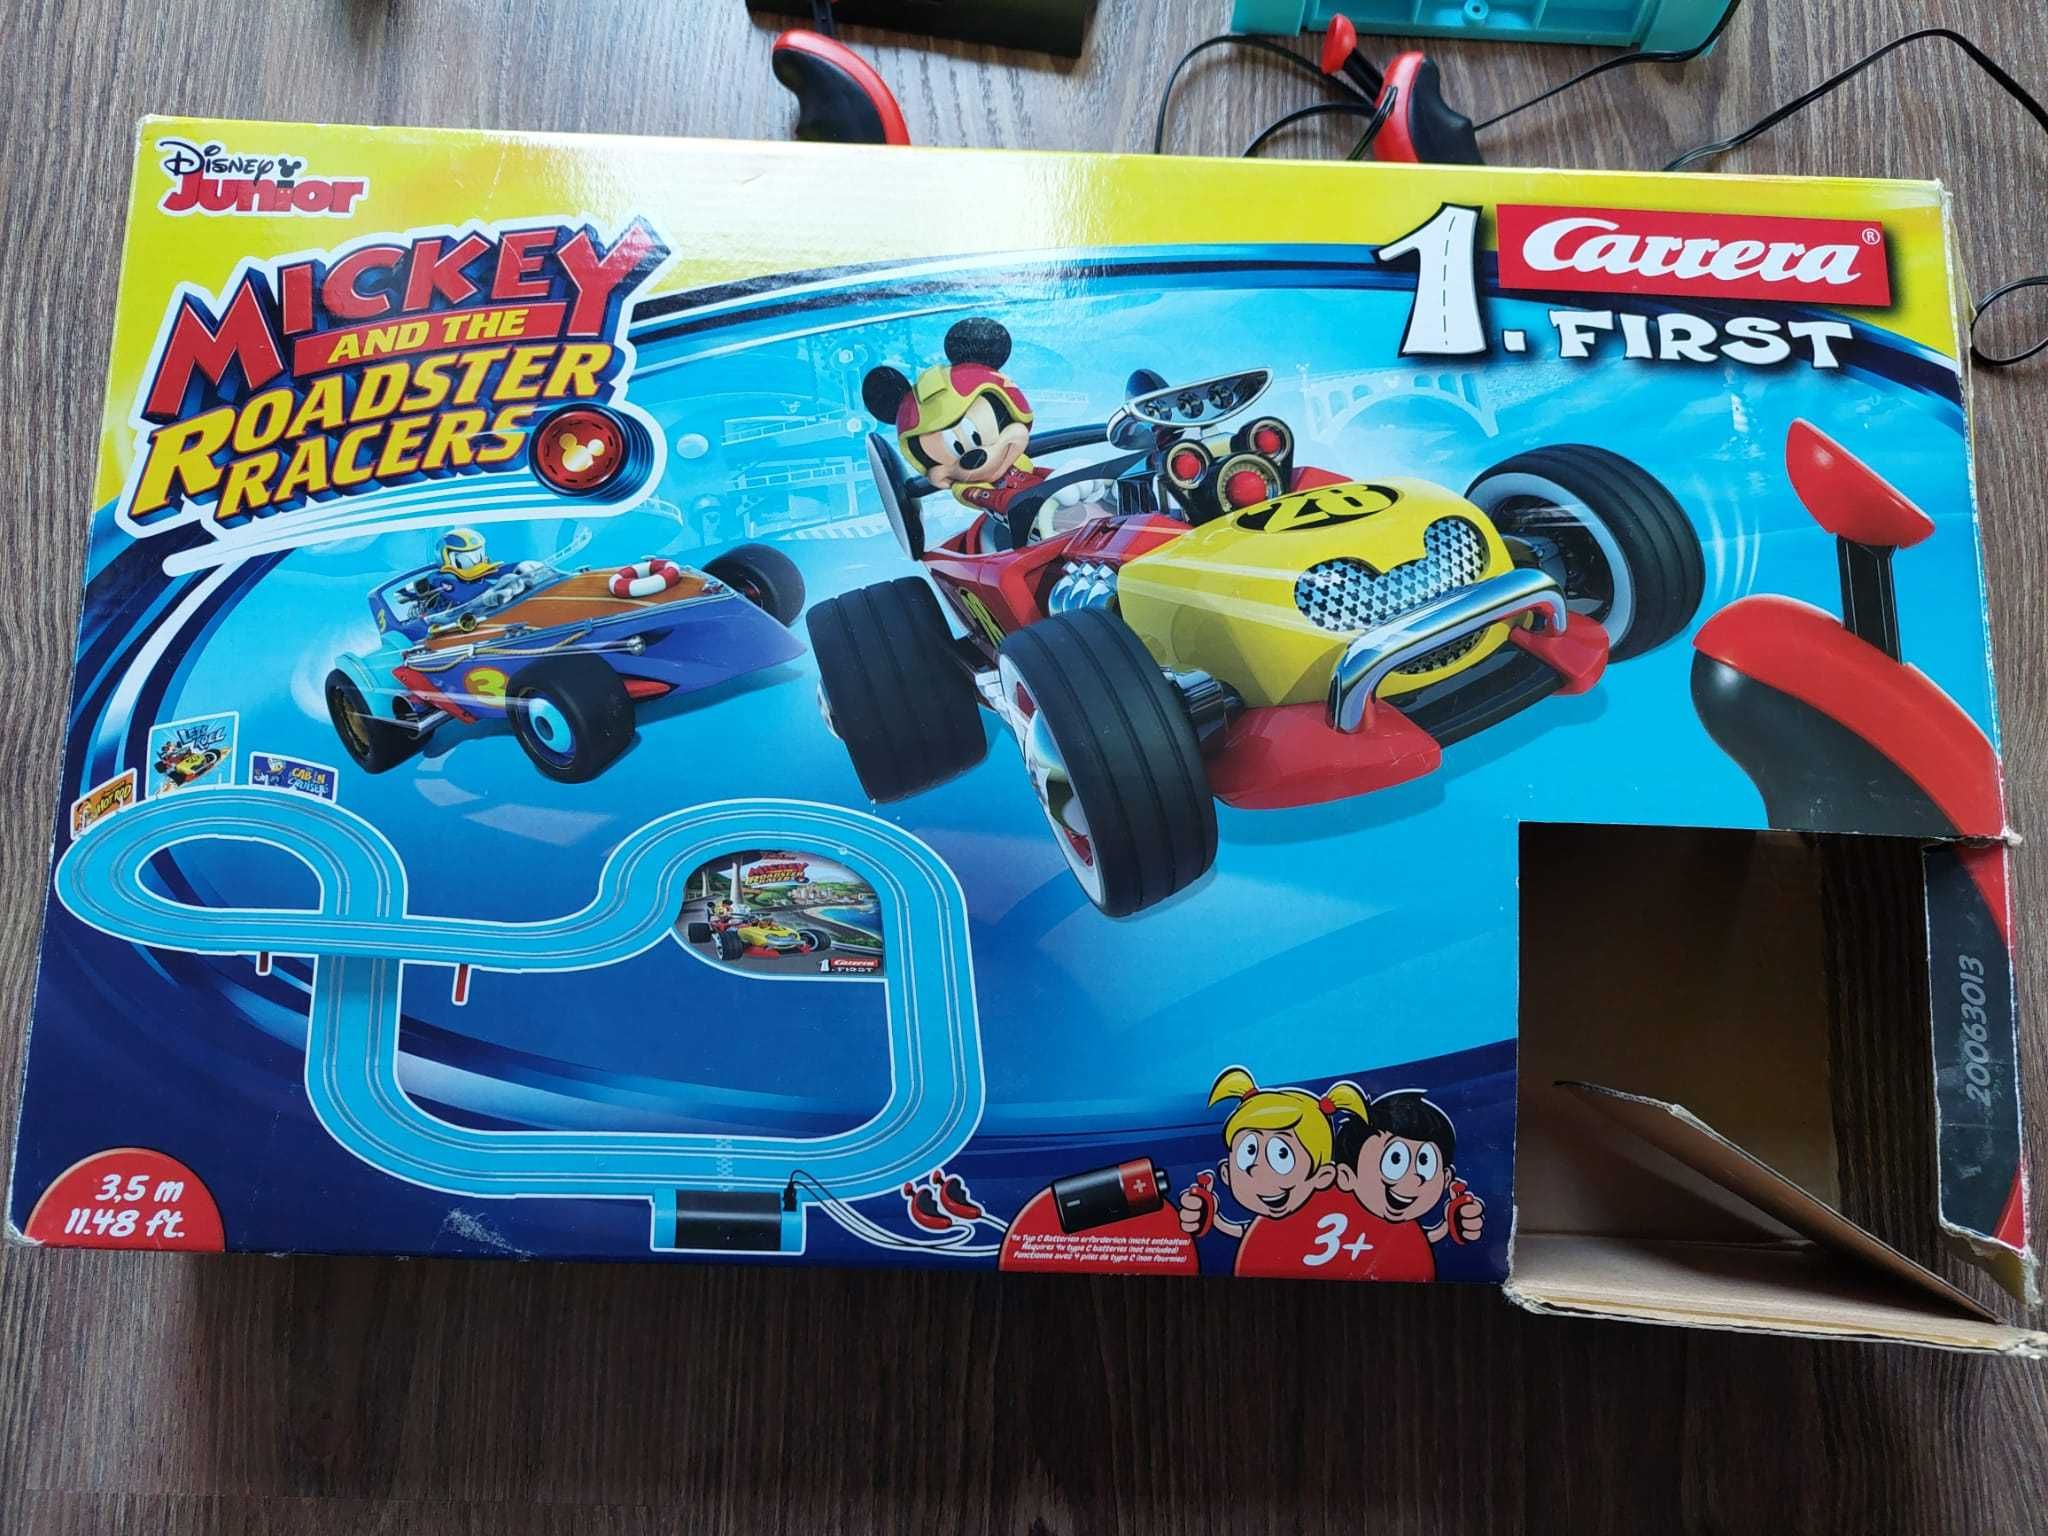 Circuit Mickey and the roadster racers